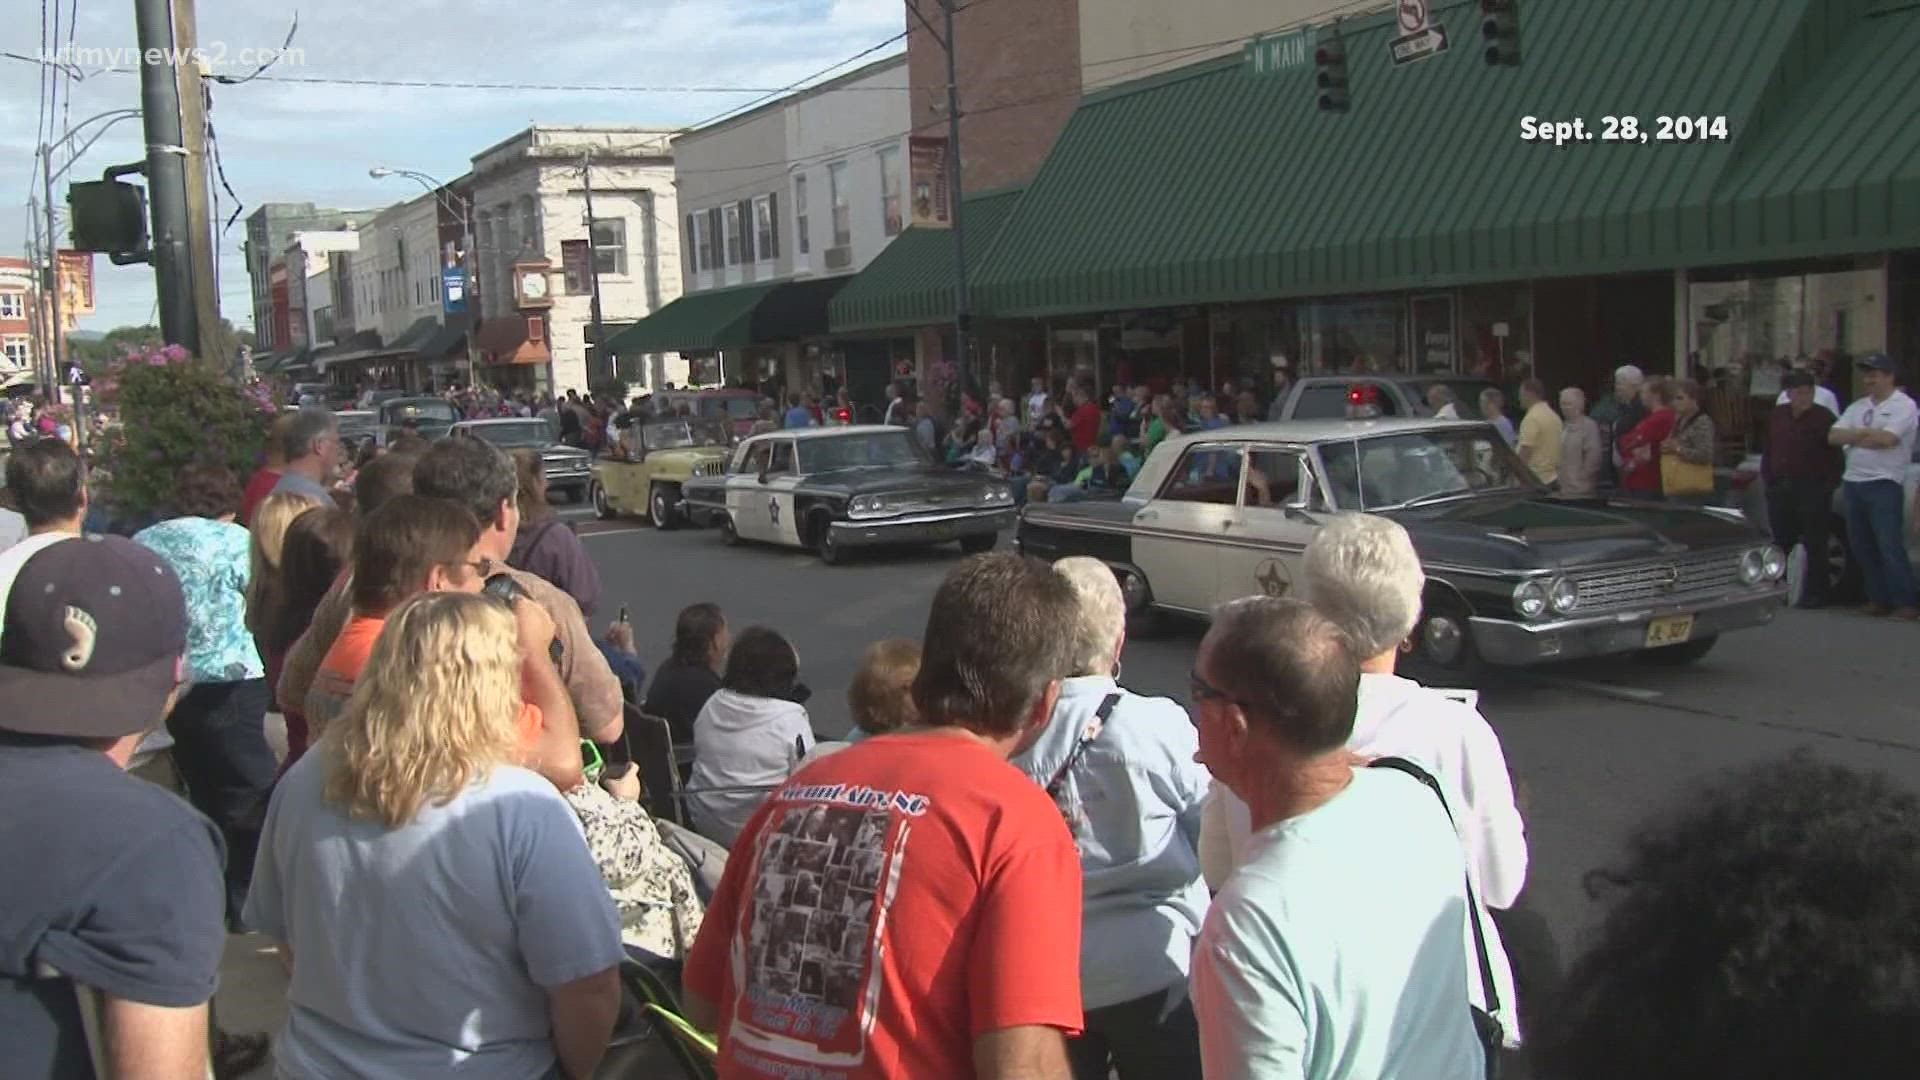 Mount Airy prepares for Mayberry Days